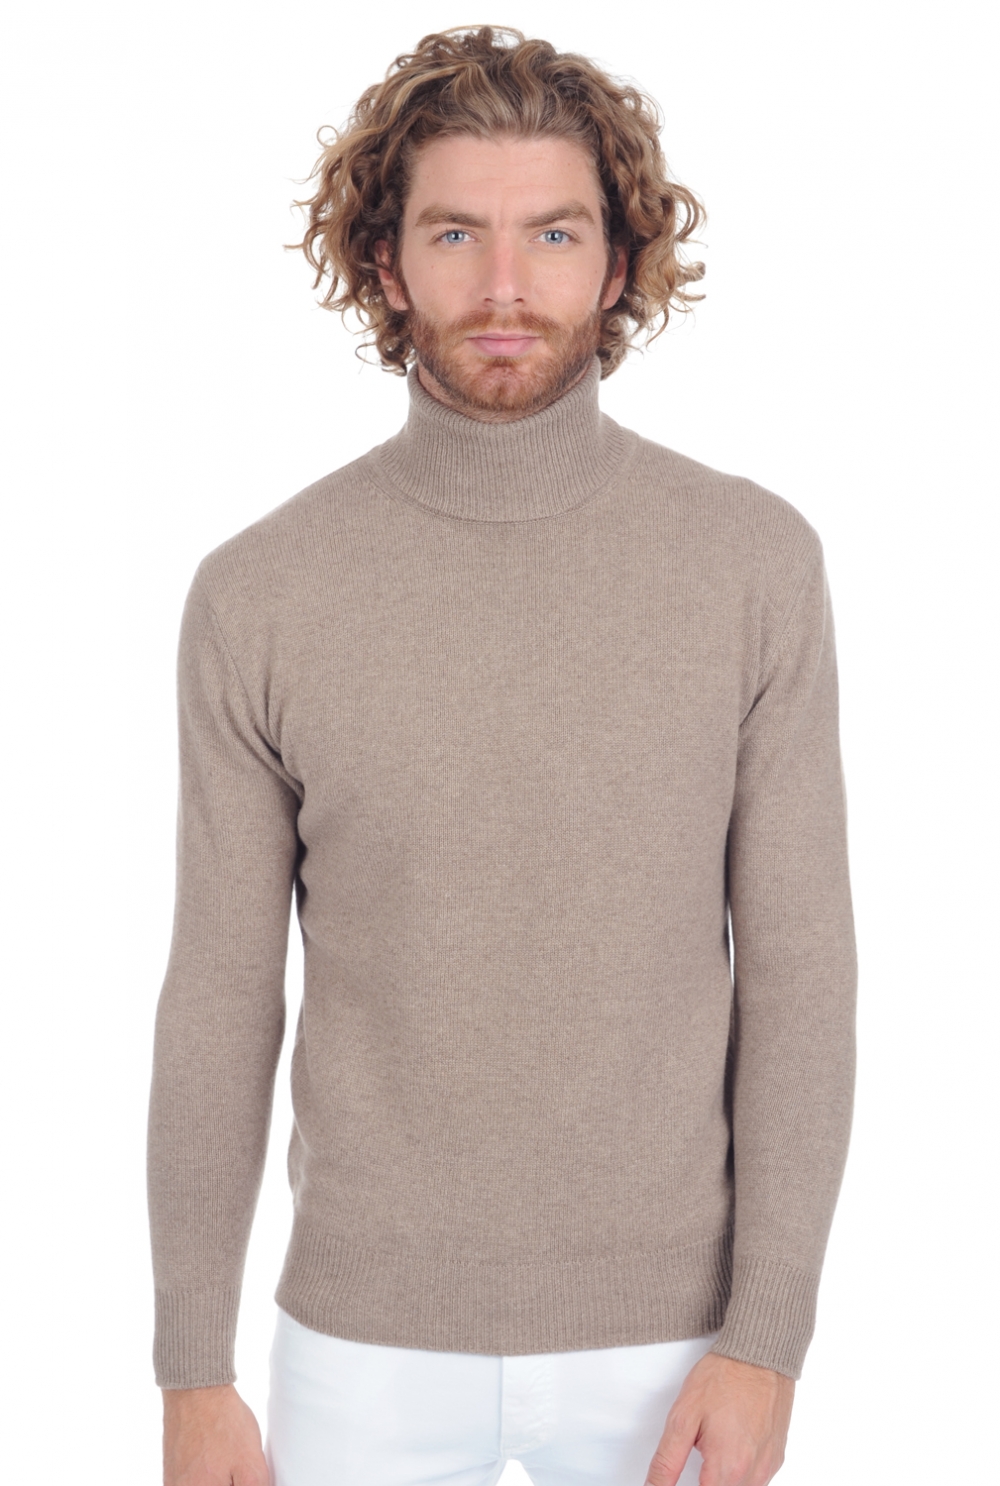 Cachemire pull homme col roule edgar 4f premium dolma natural s